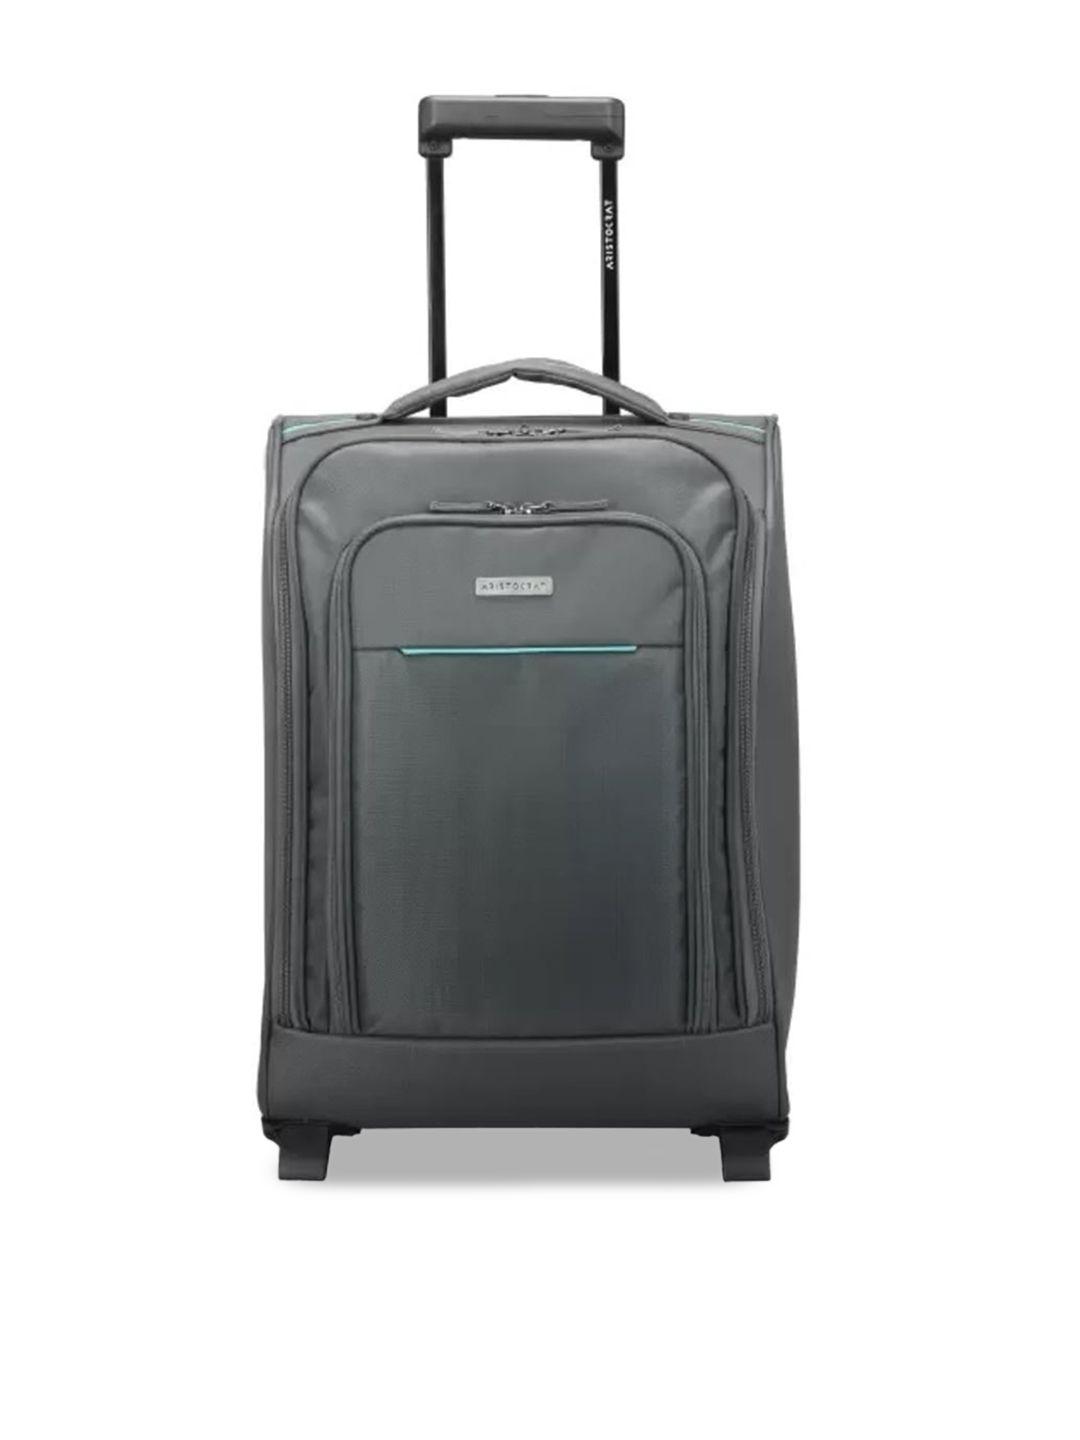 Aristocrat Soft-Sided Trolley Suitcases